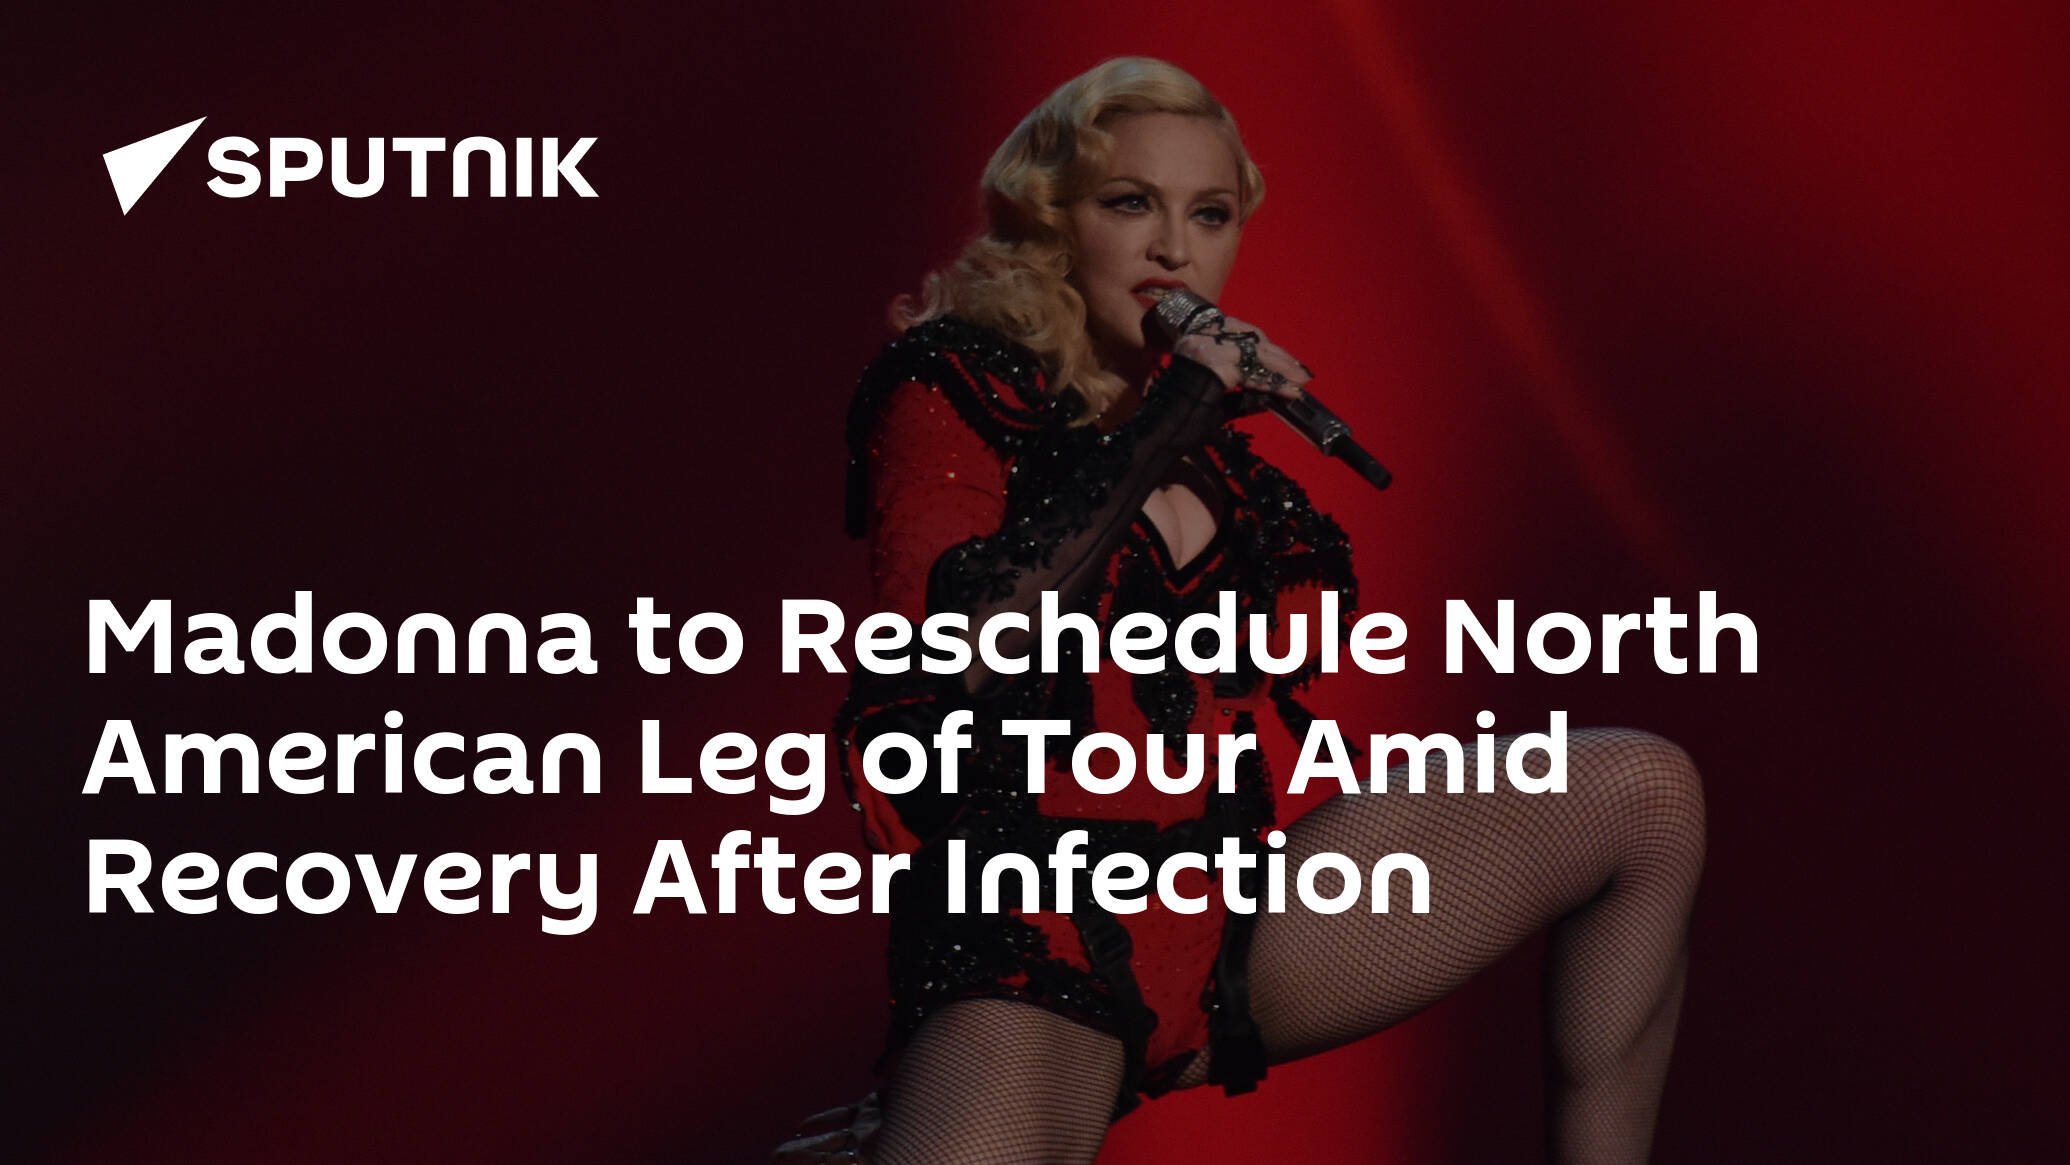 Madonna to Reschedule North American Leg of Tour Amid Recovery After Infection